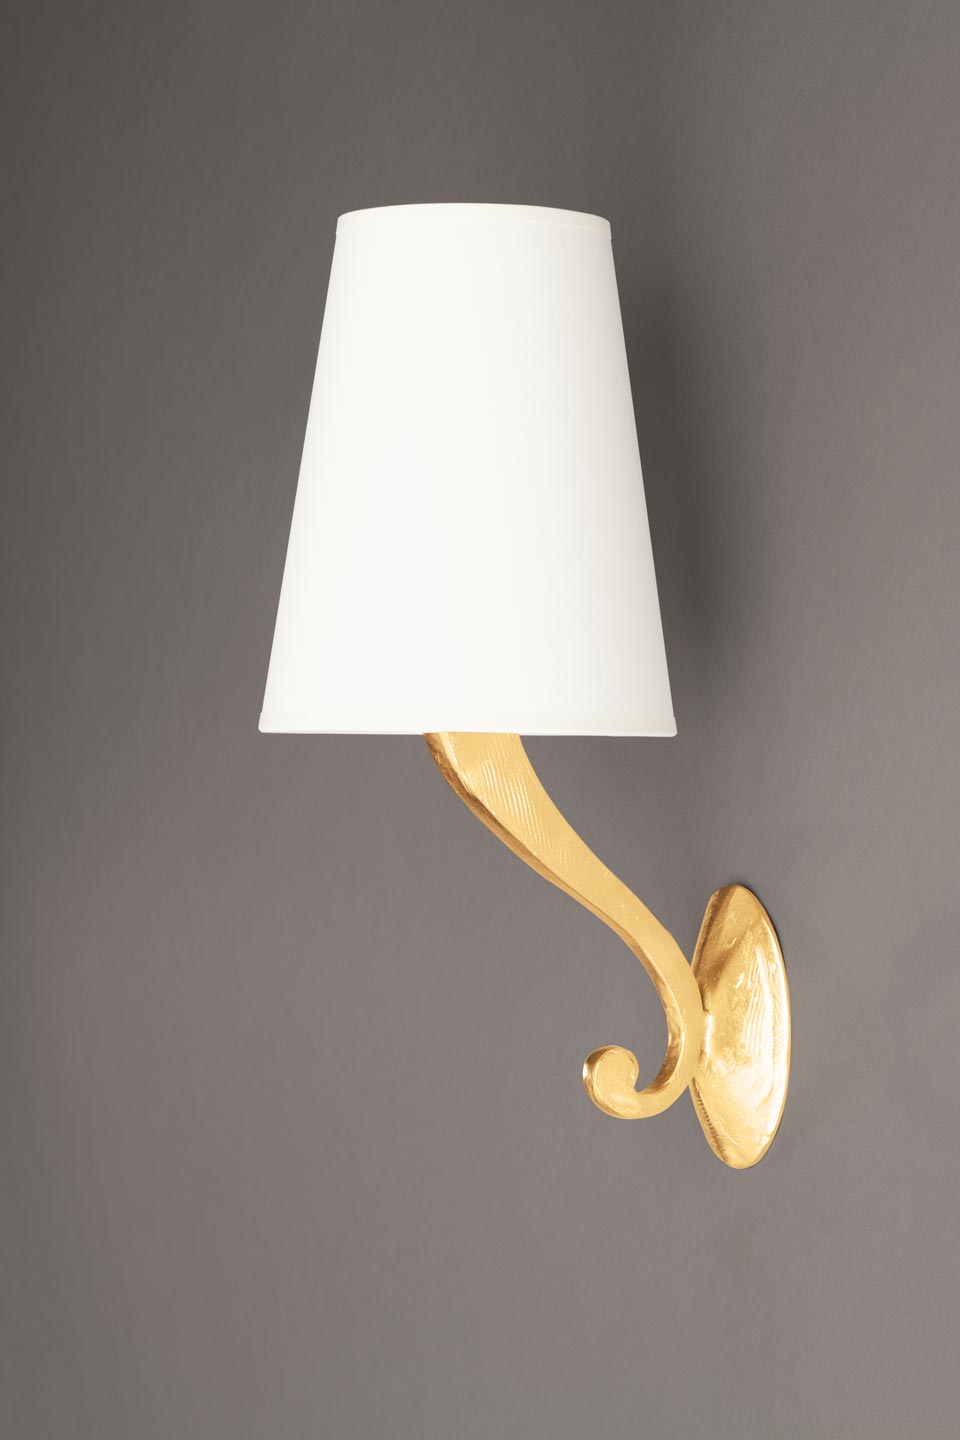 Linda classic wall lamp in gilded bronze. Objet insolite. 